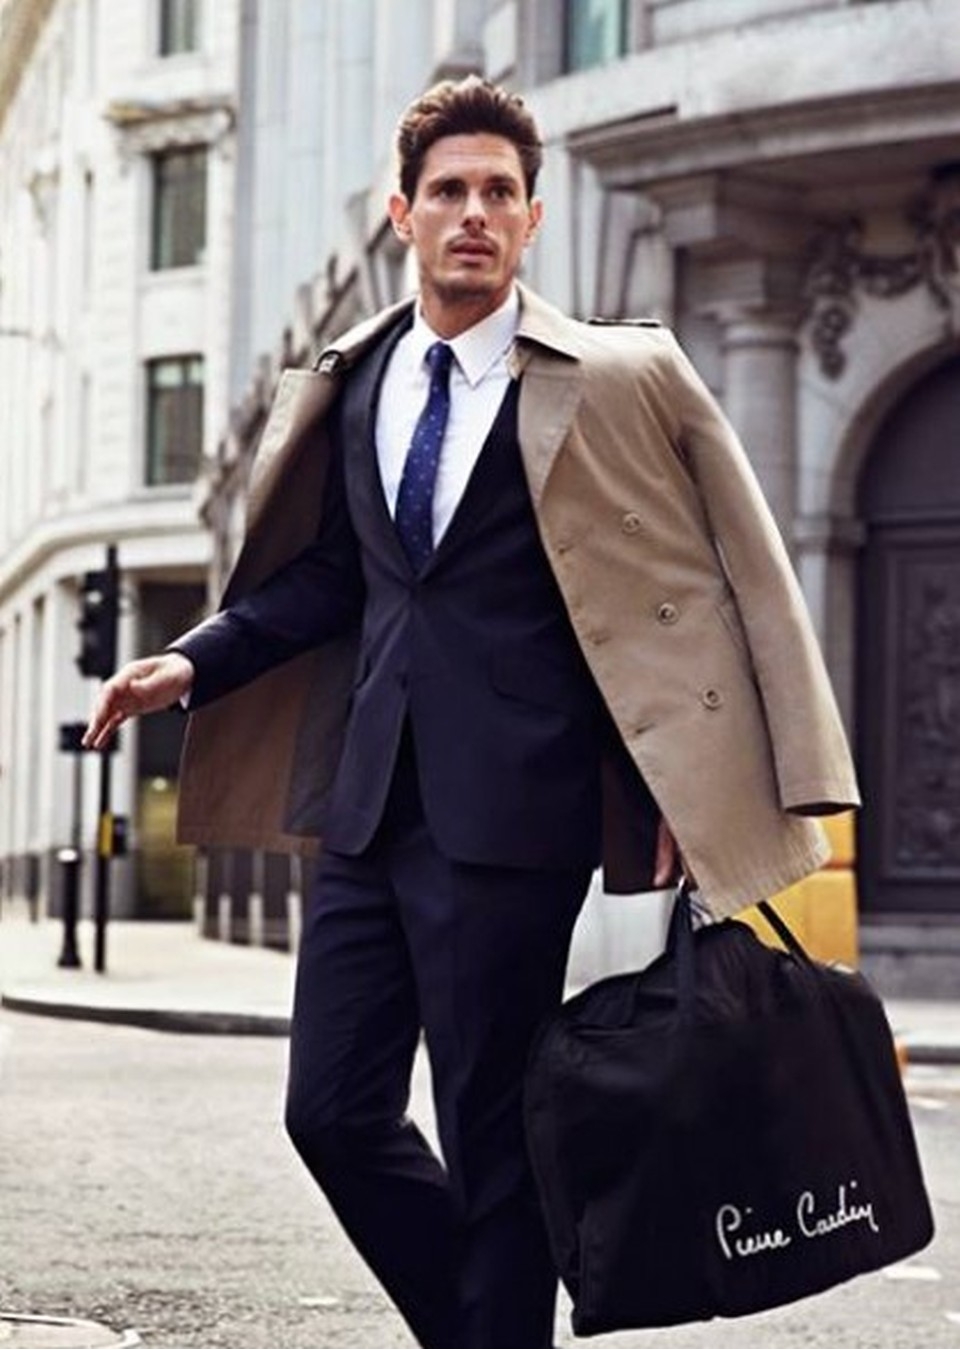 MALE MODELS IN SUITS: Michael Pichler